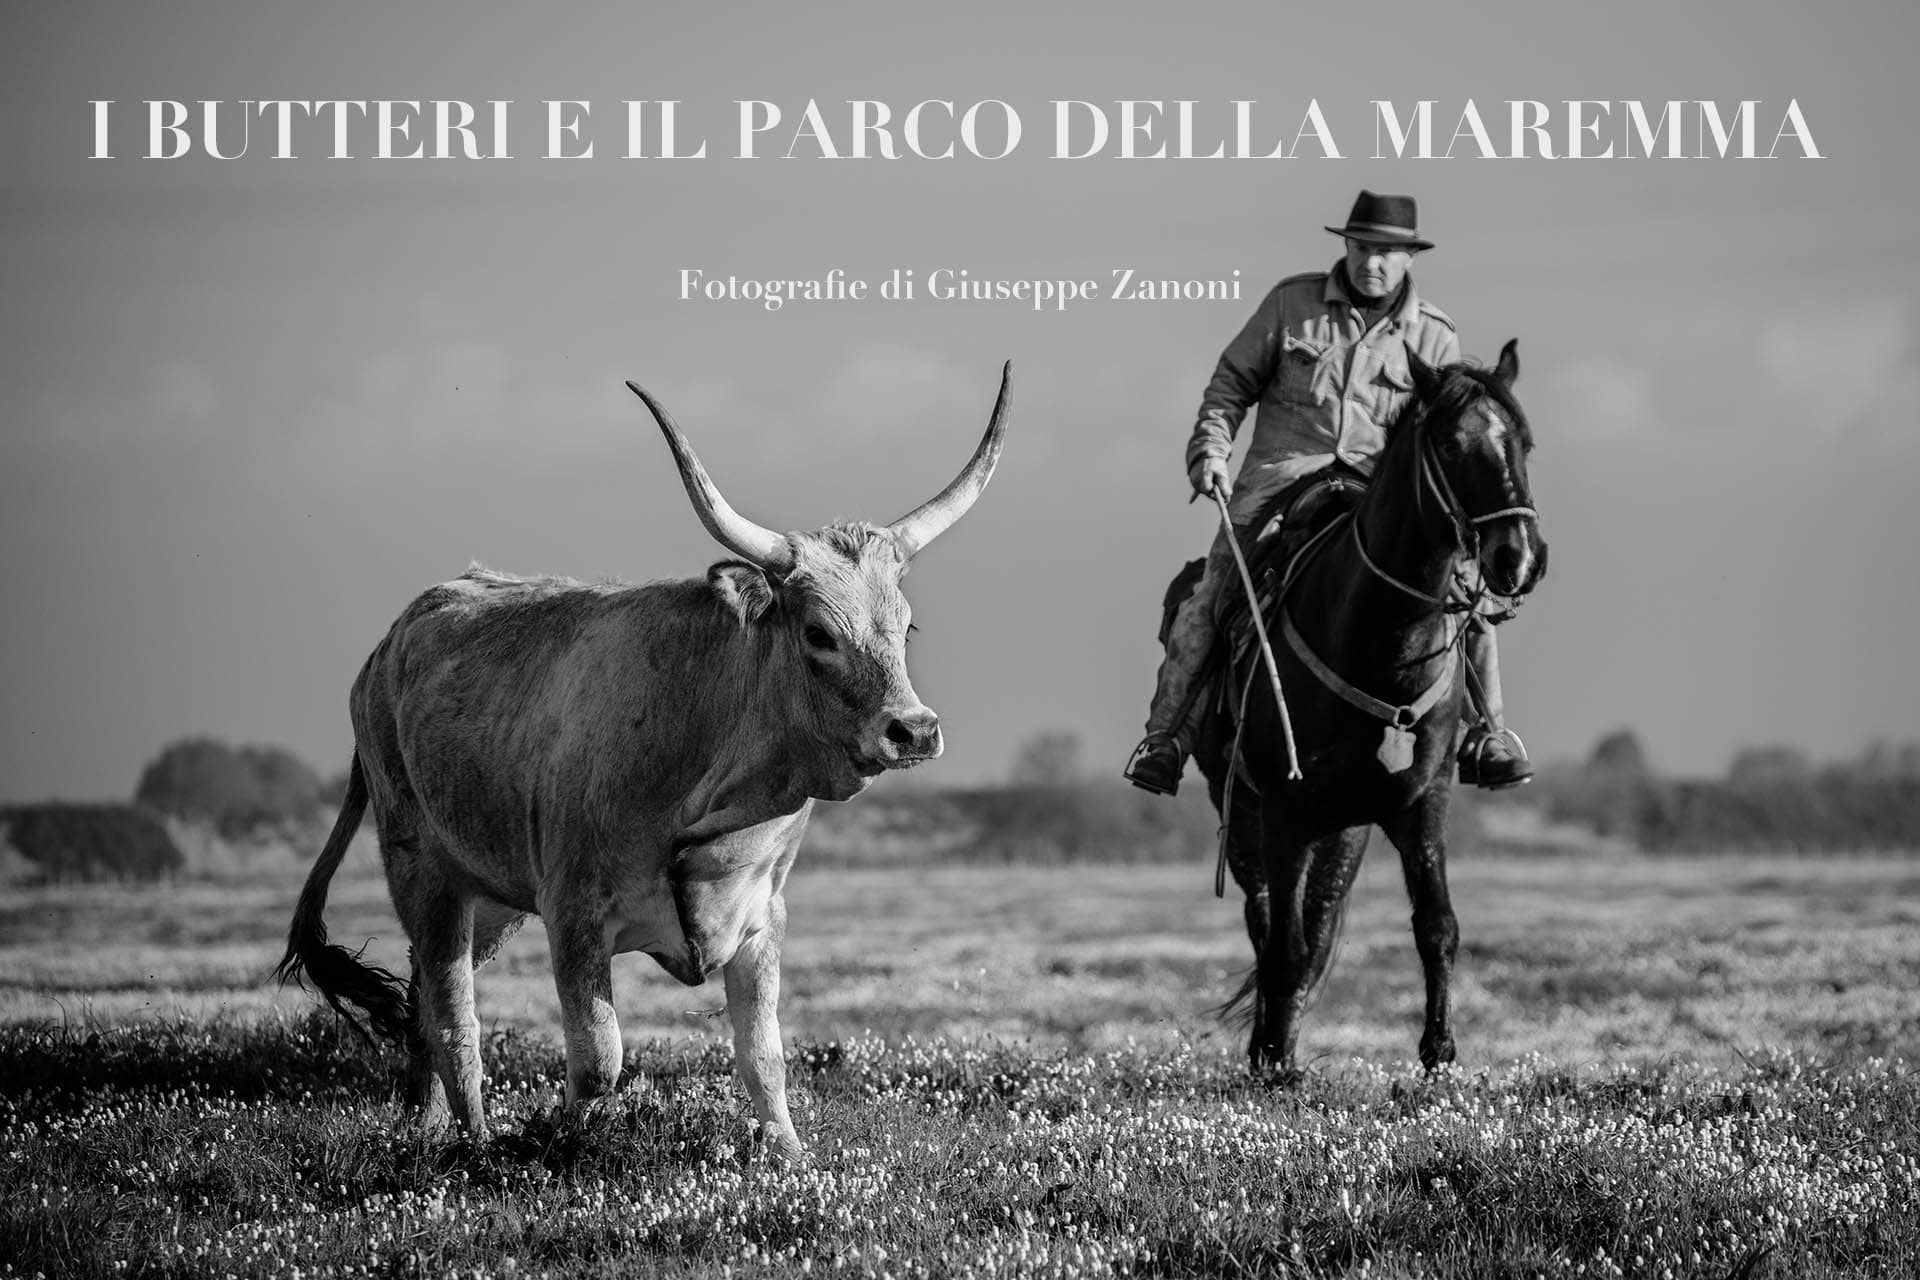 Photo book "THE BUTTERS AND THE MAREMMA PARK" 30×45 cm.